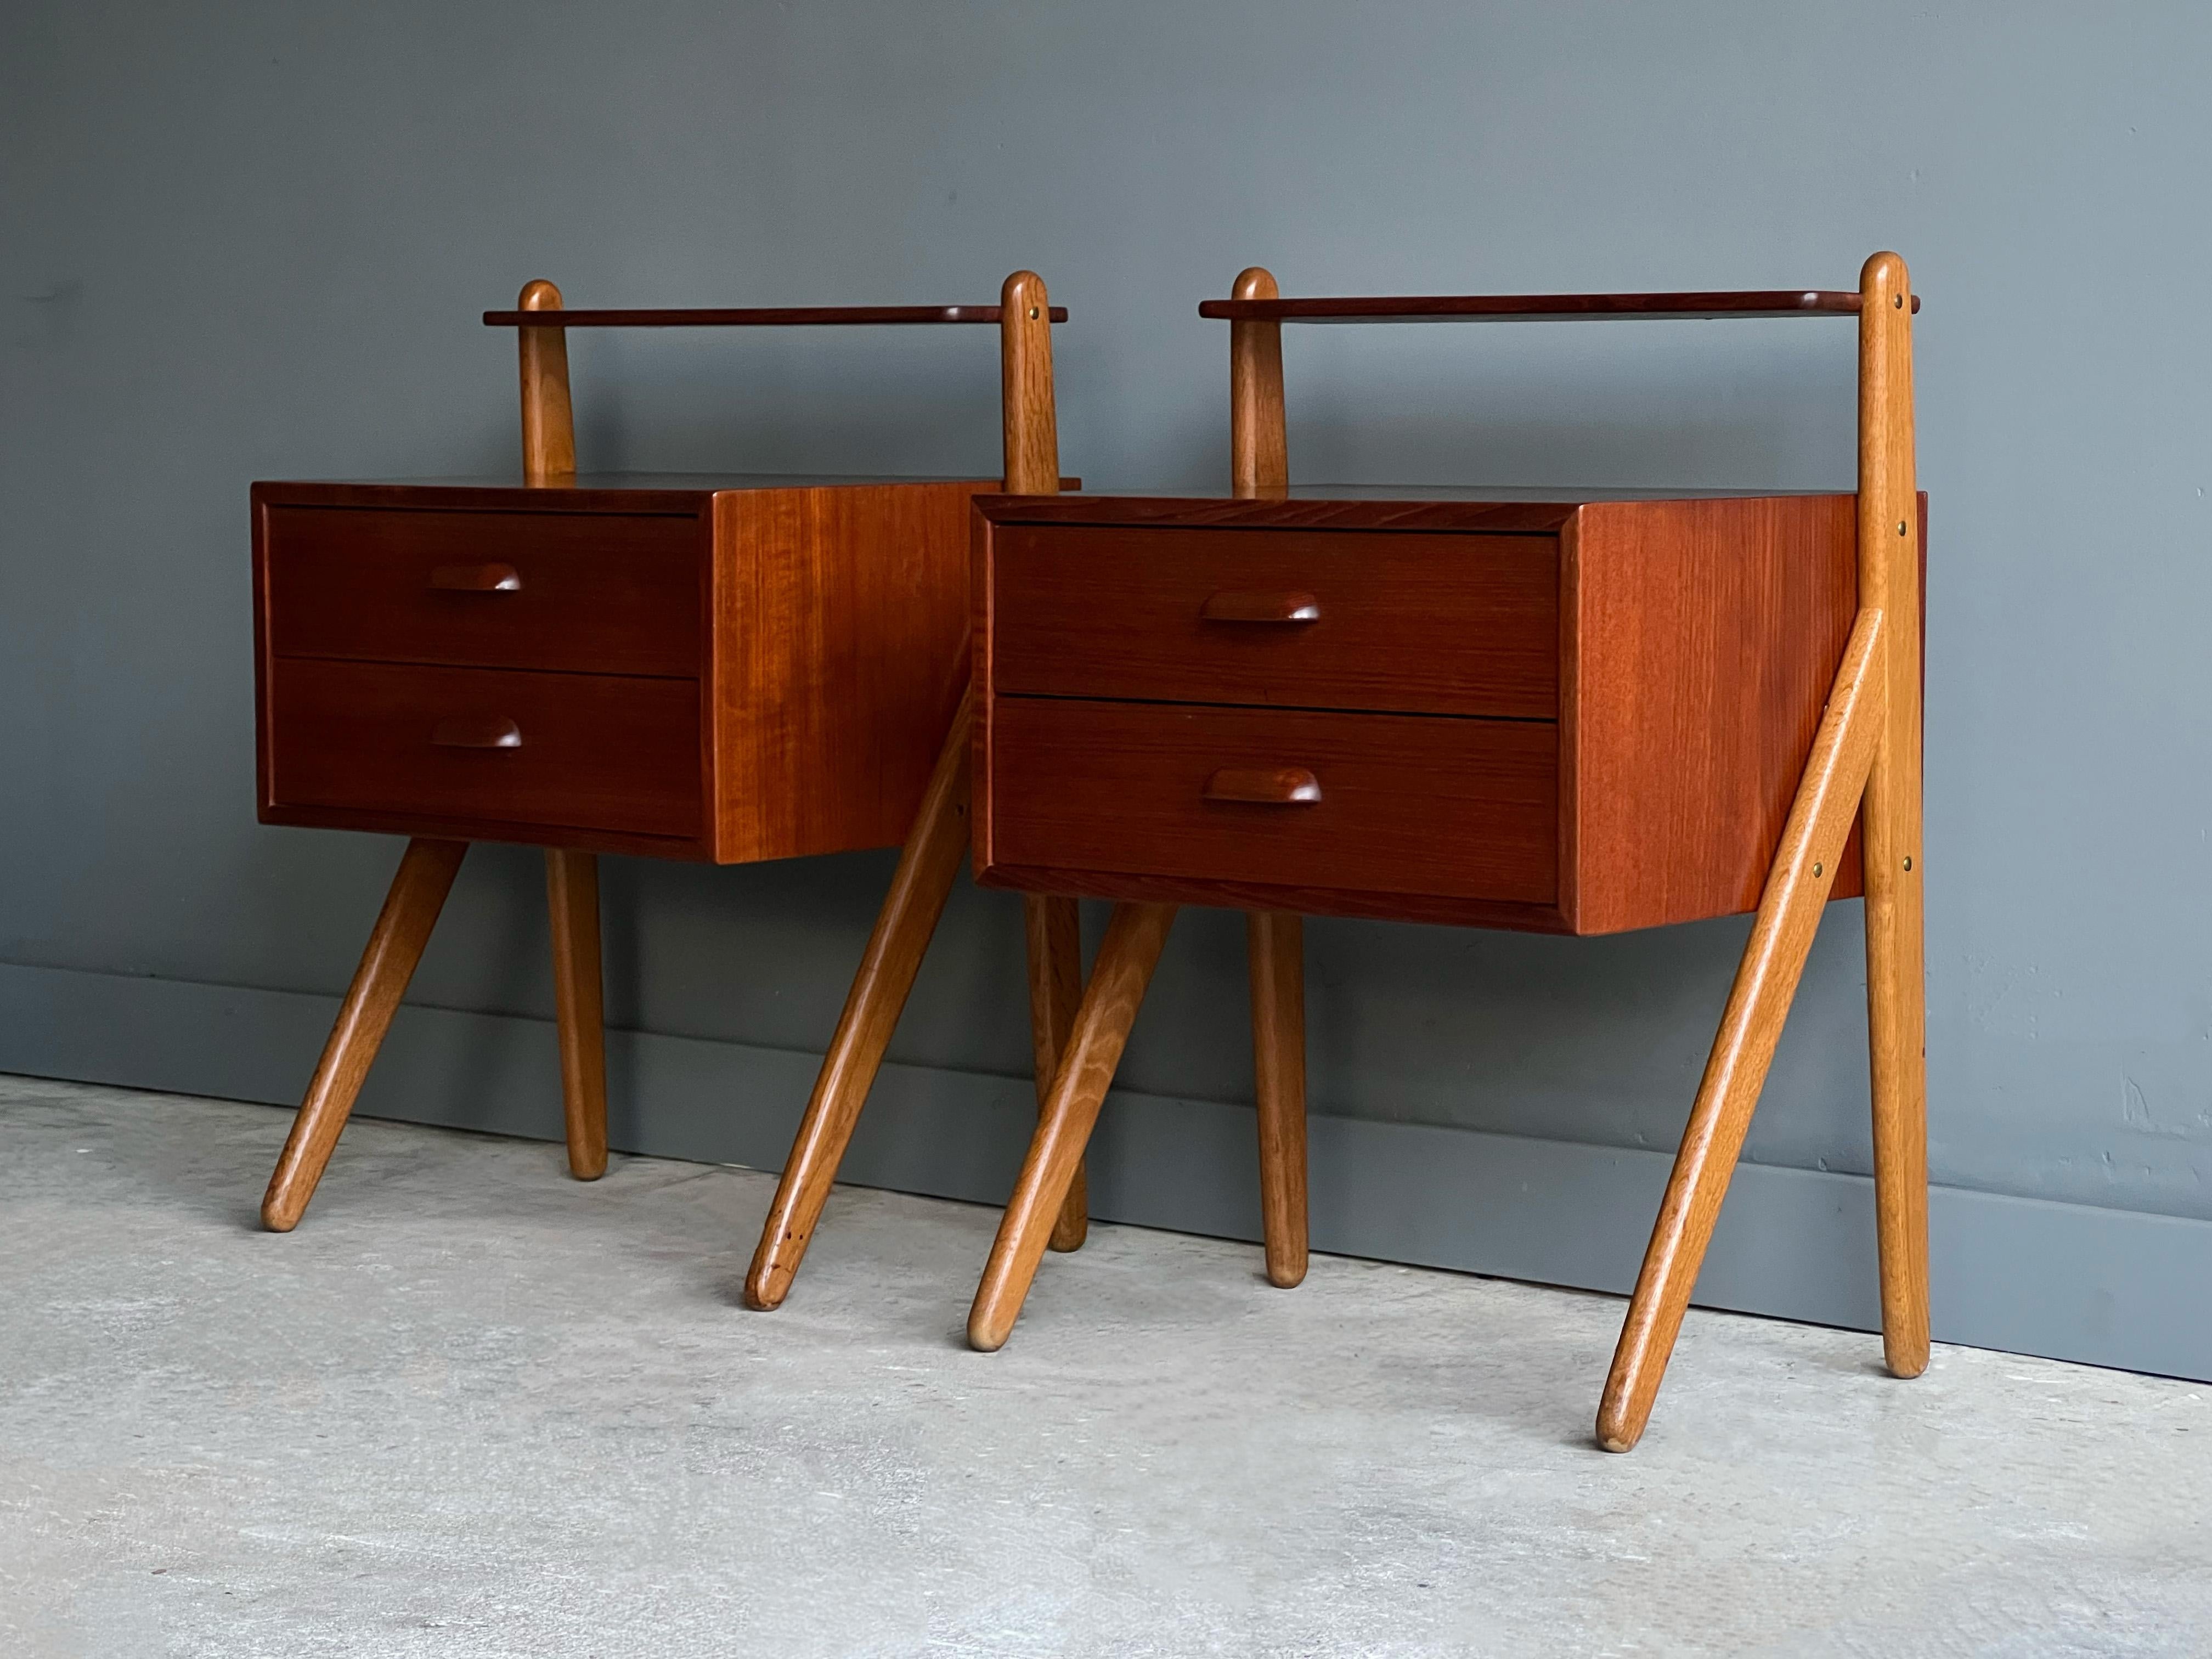 Petite pair of Danish nightstands or end tables designed by Sigfred Omann and produced by Olholm Møbelfabrik. Circa, early 1960s. 

Constructed of teak drawer boxes, solid teak upper shelves and beautiful grained oak legs with brass hardware. We